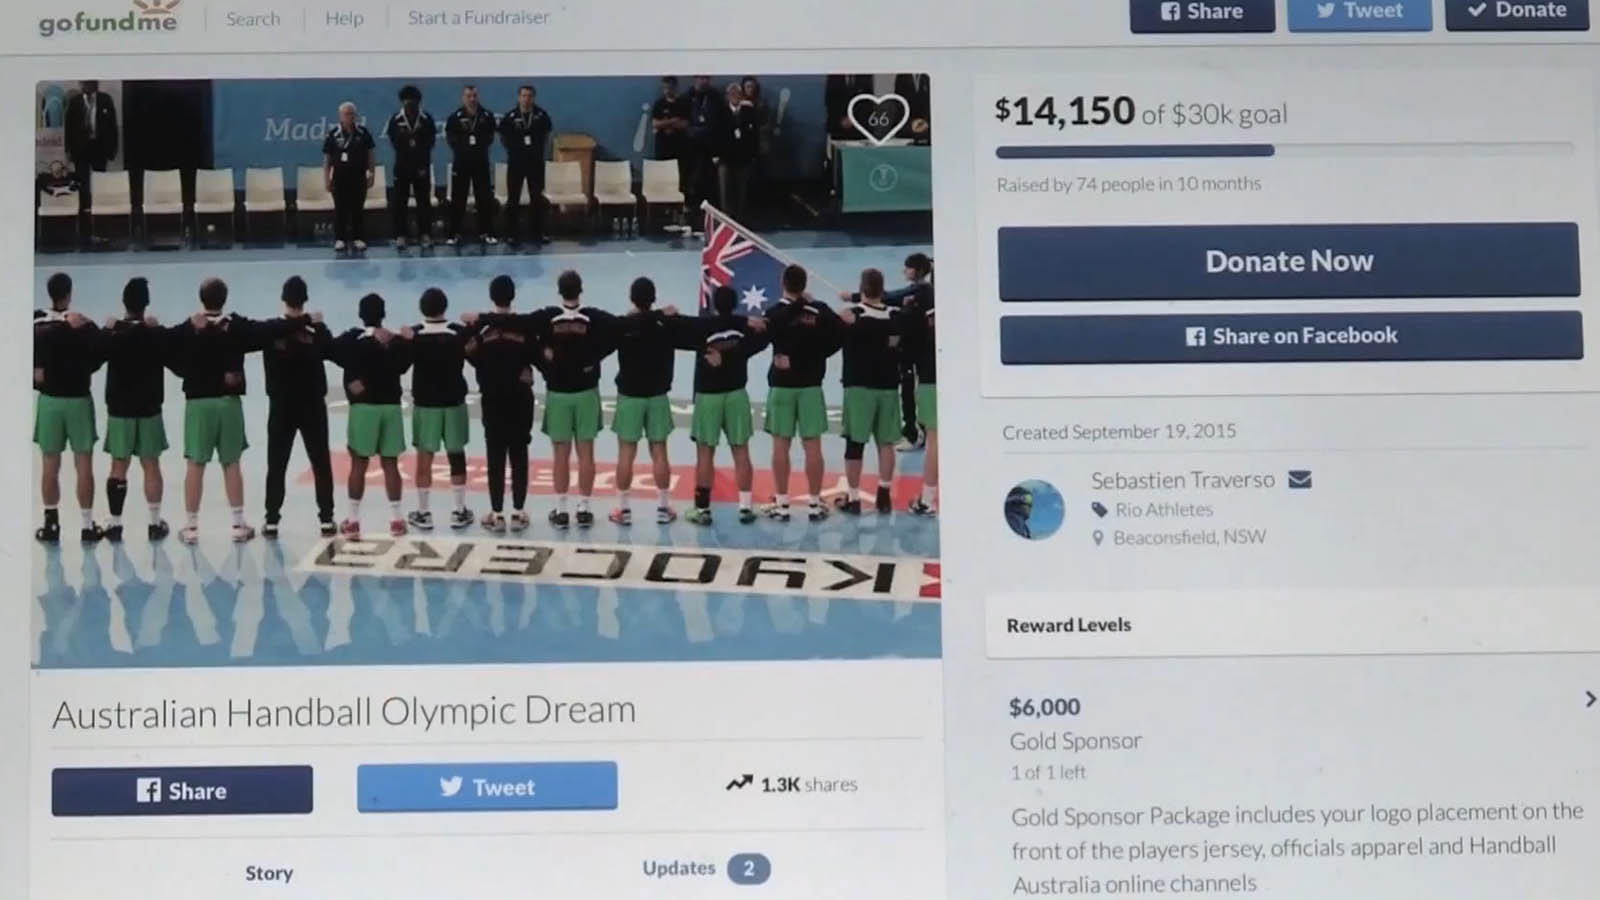 Aussie handballers use crowdfunding to pay for Olympic dream